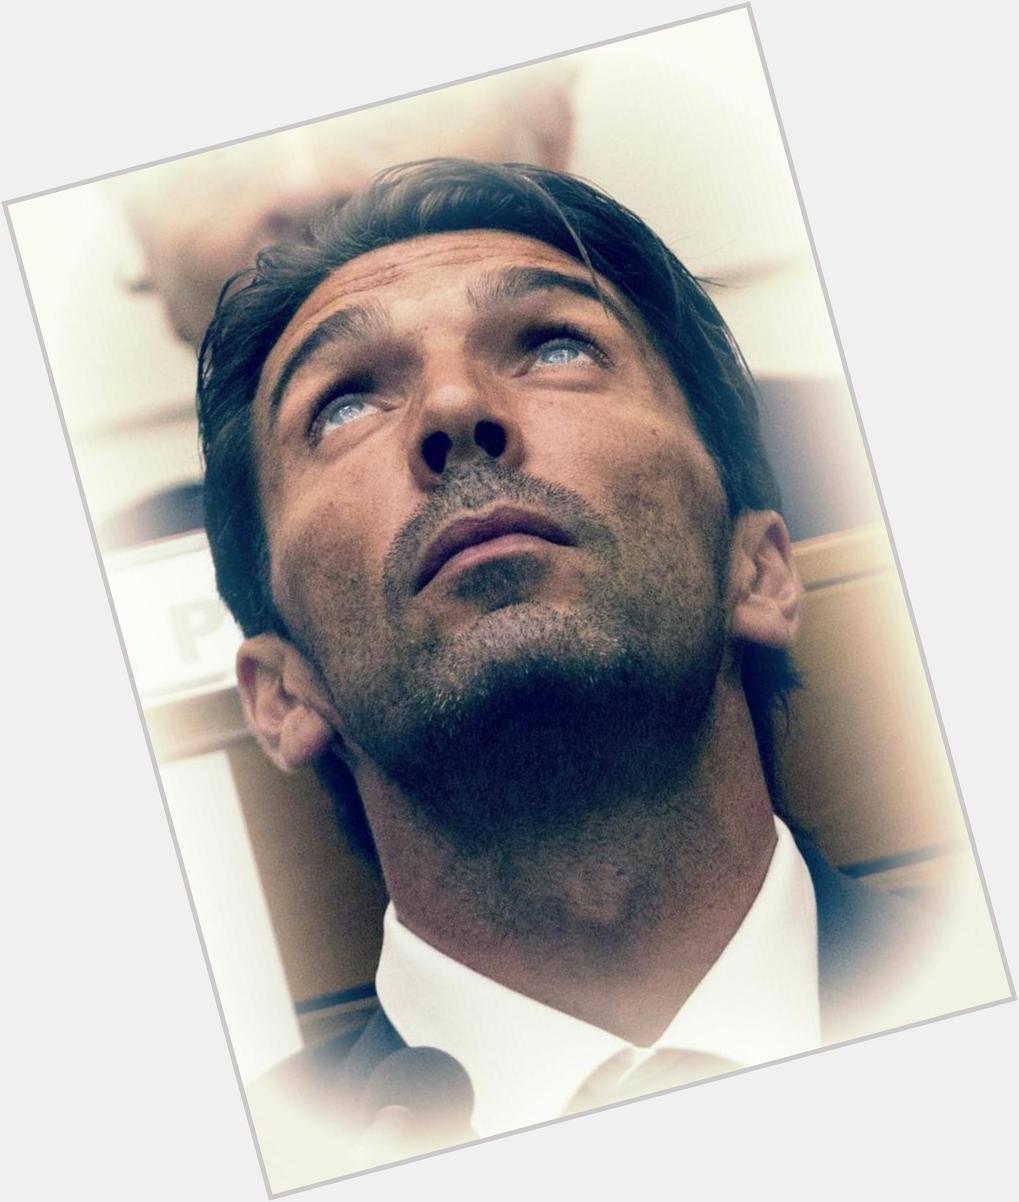 Happy 37th Birthday to the greatest keeper I\ve ever seen... Gianluigi Buffon! A Champion on & off the field 